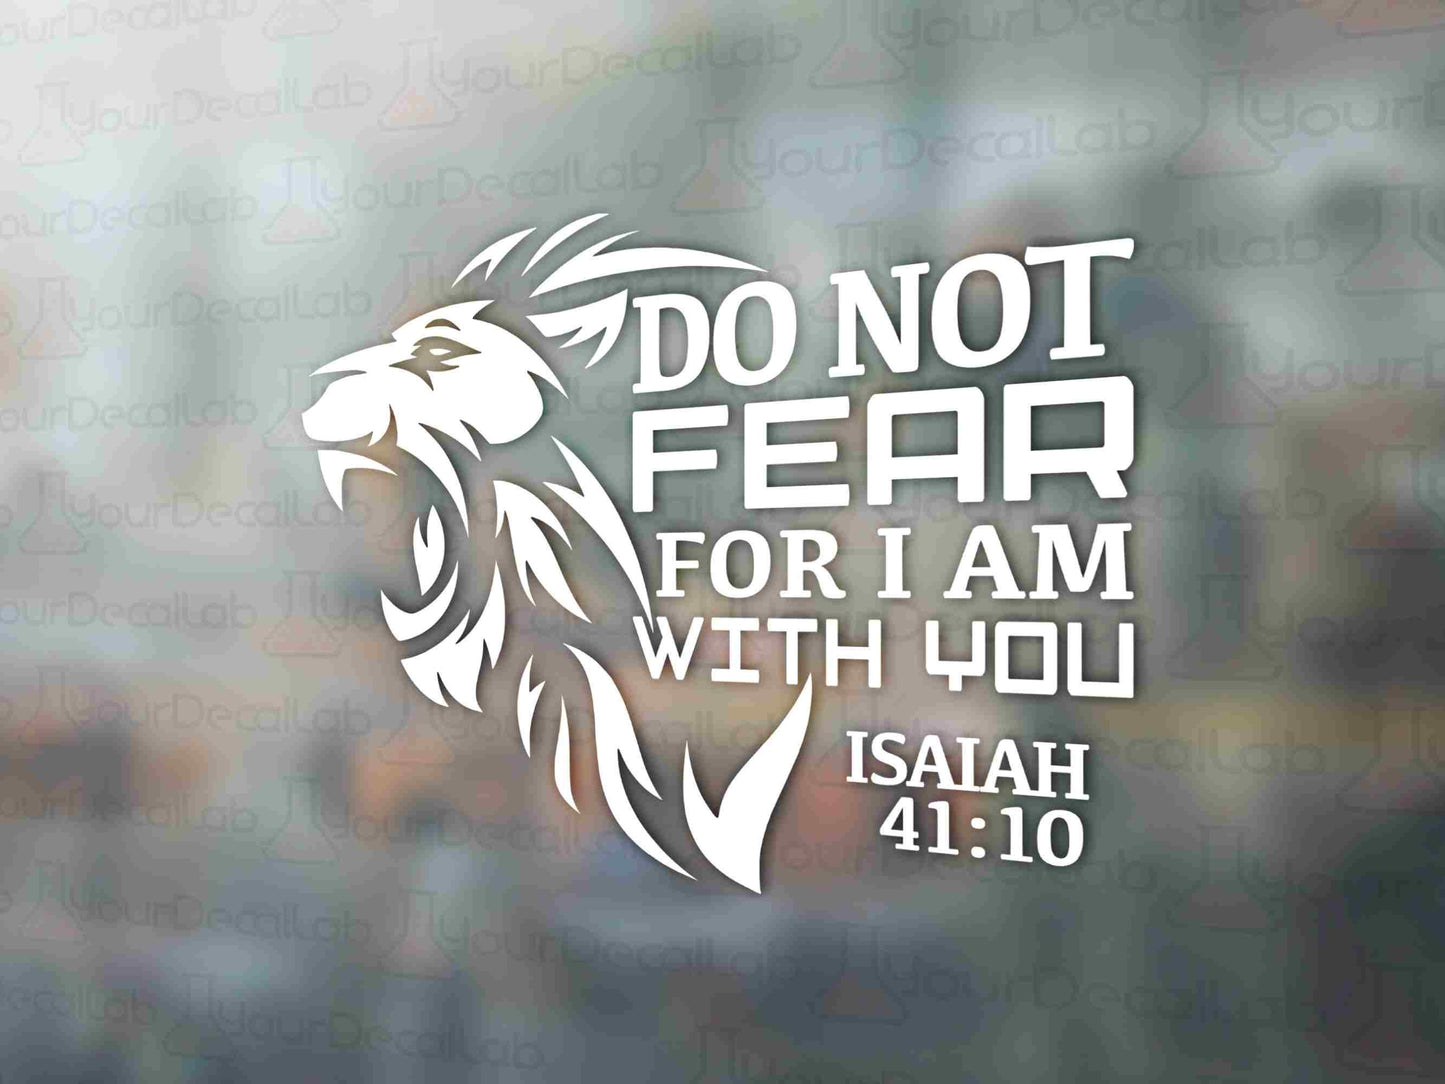 Do Not Fear Isaiah 41:10 Decal - Many Colors & Sizes